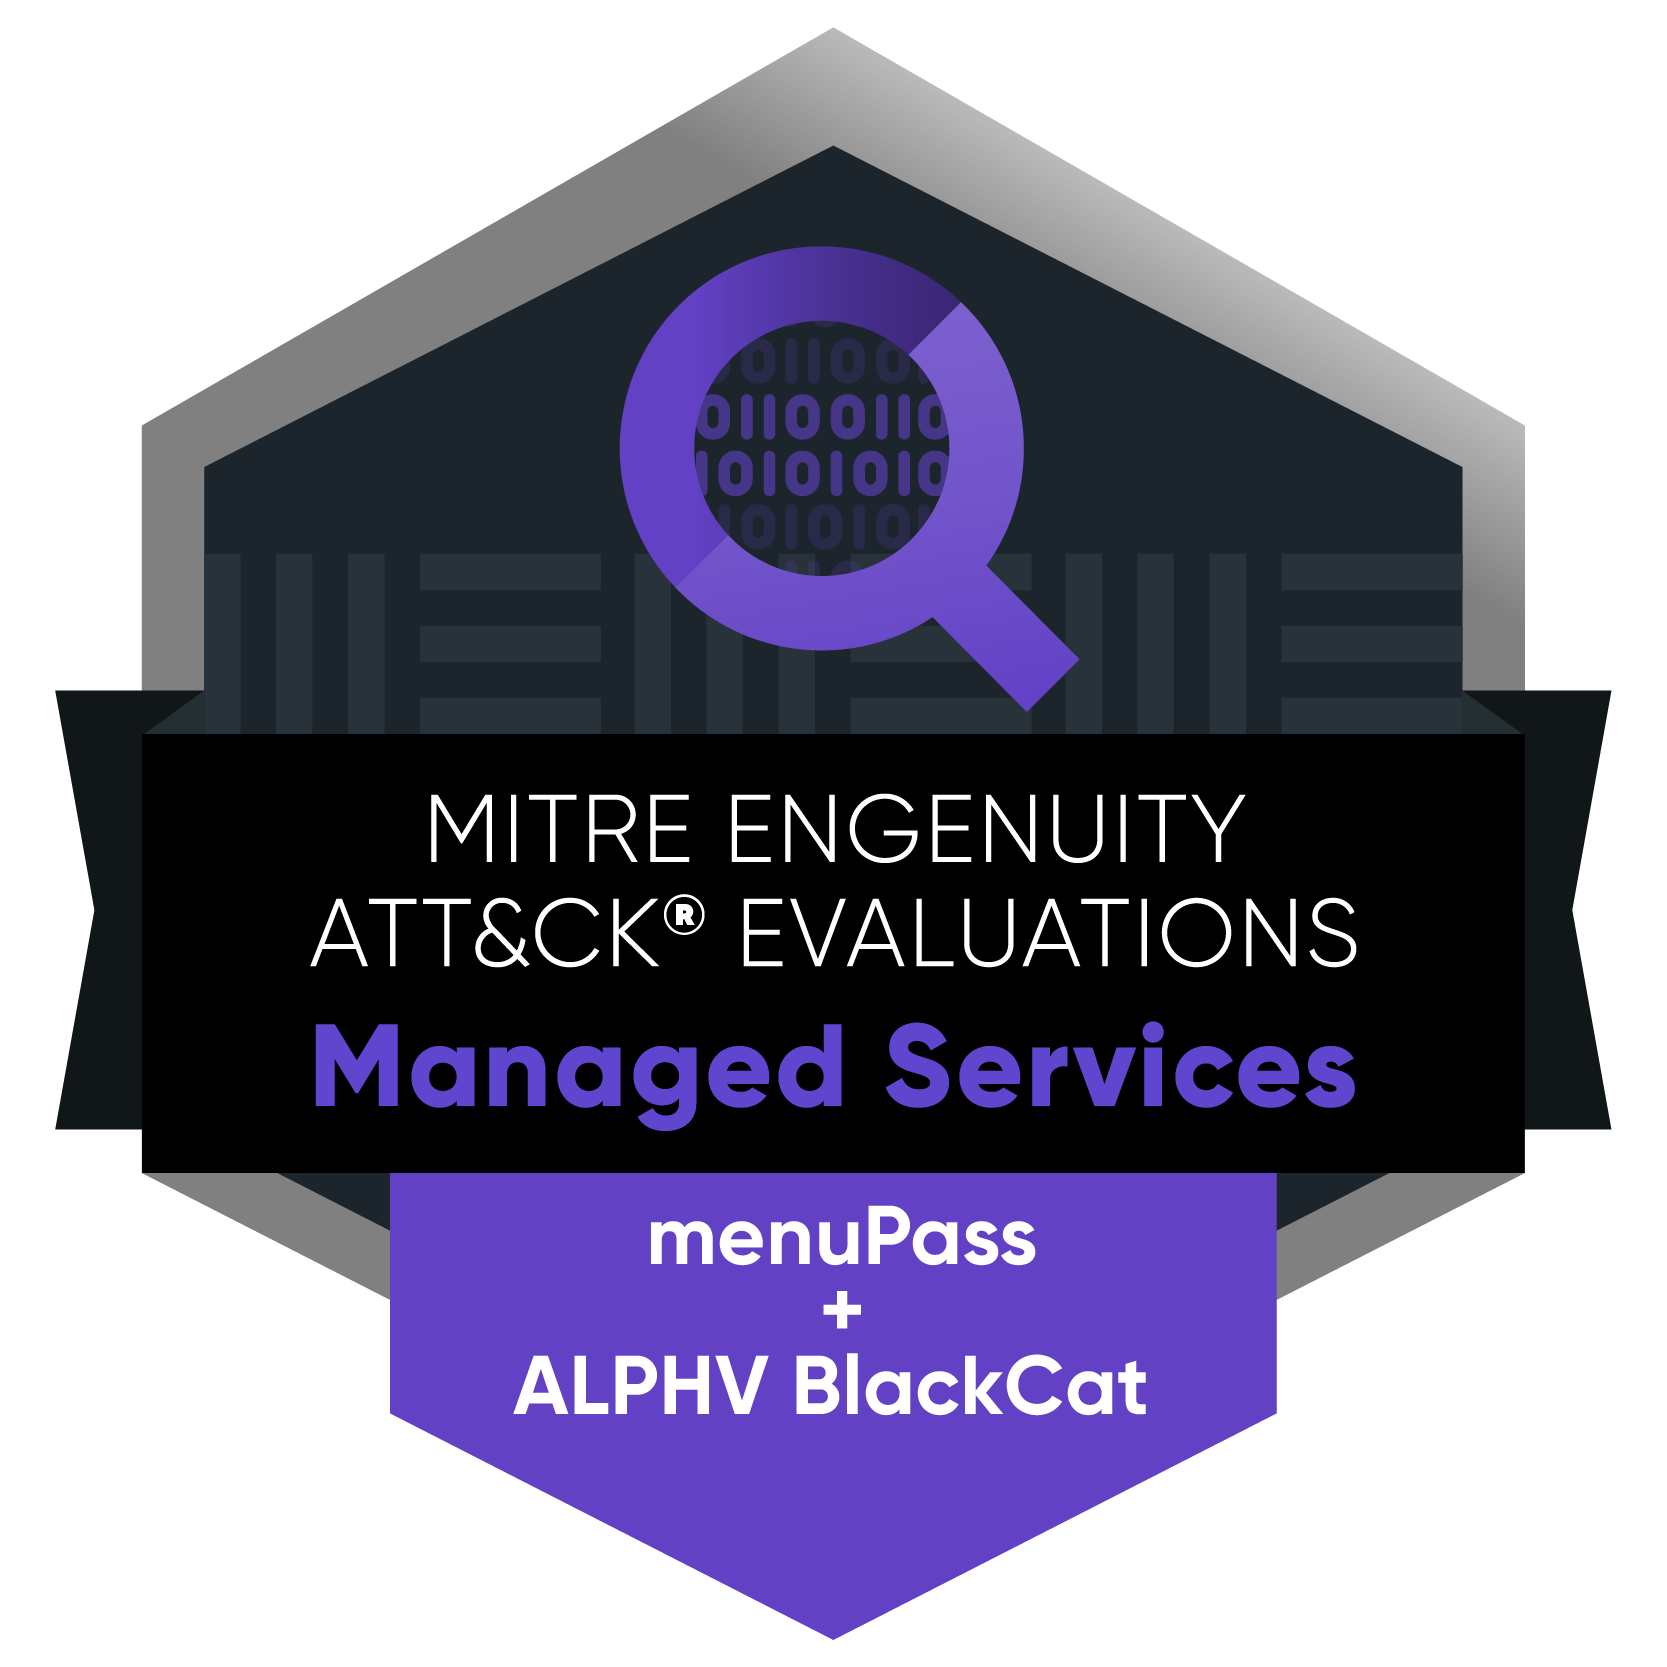 MITRE ENGENUITY ATTACK EVALUATIONS Managed Services Badge